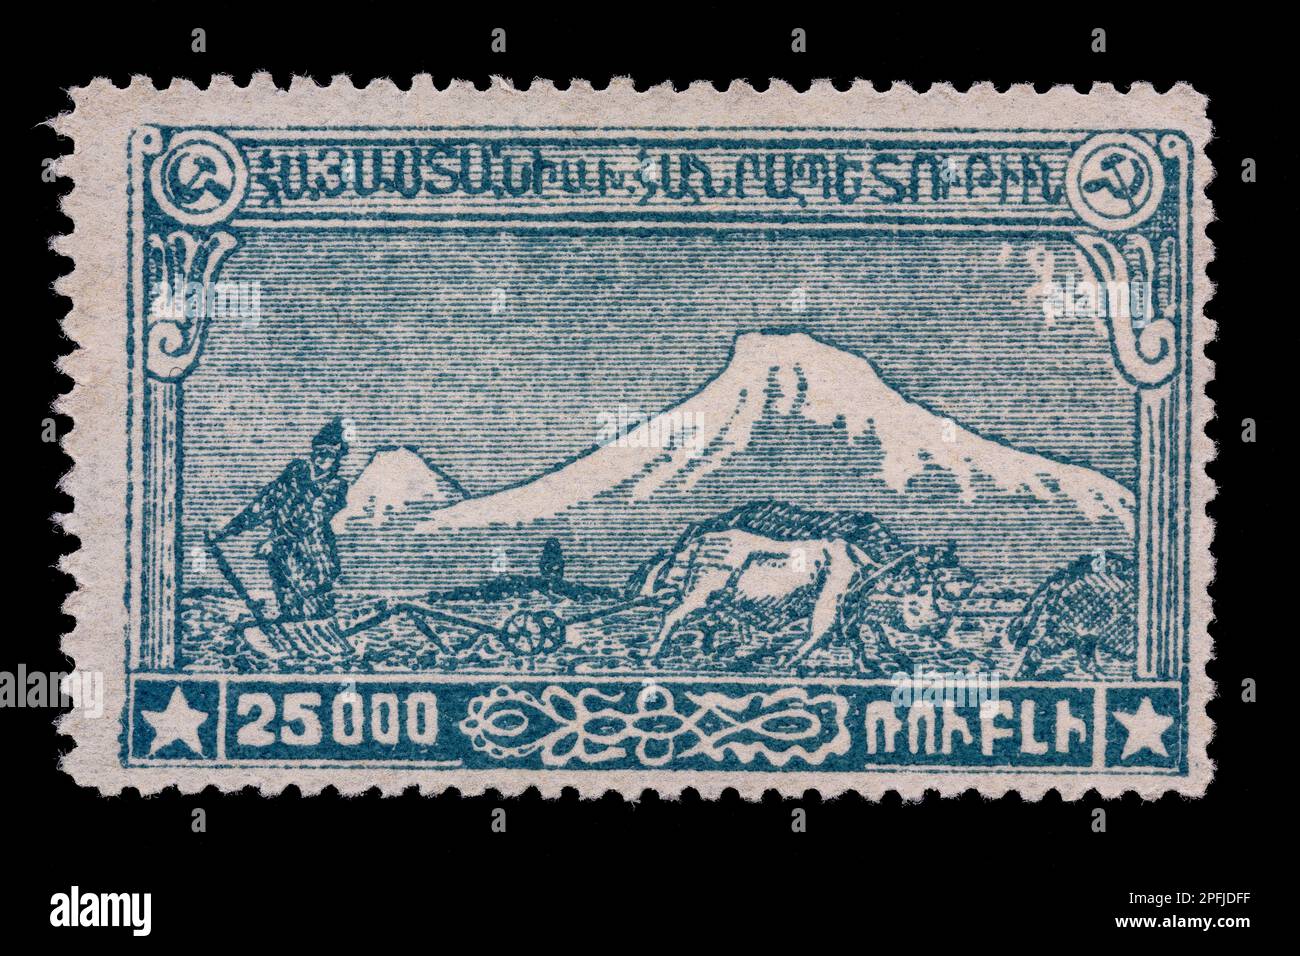 Early postage stamp from Armenia. Created but never issued in 1921. Shows farming scene with snowy mountains. Face value 25000 Roubles. Stock Photo